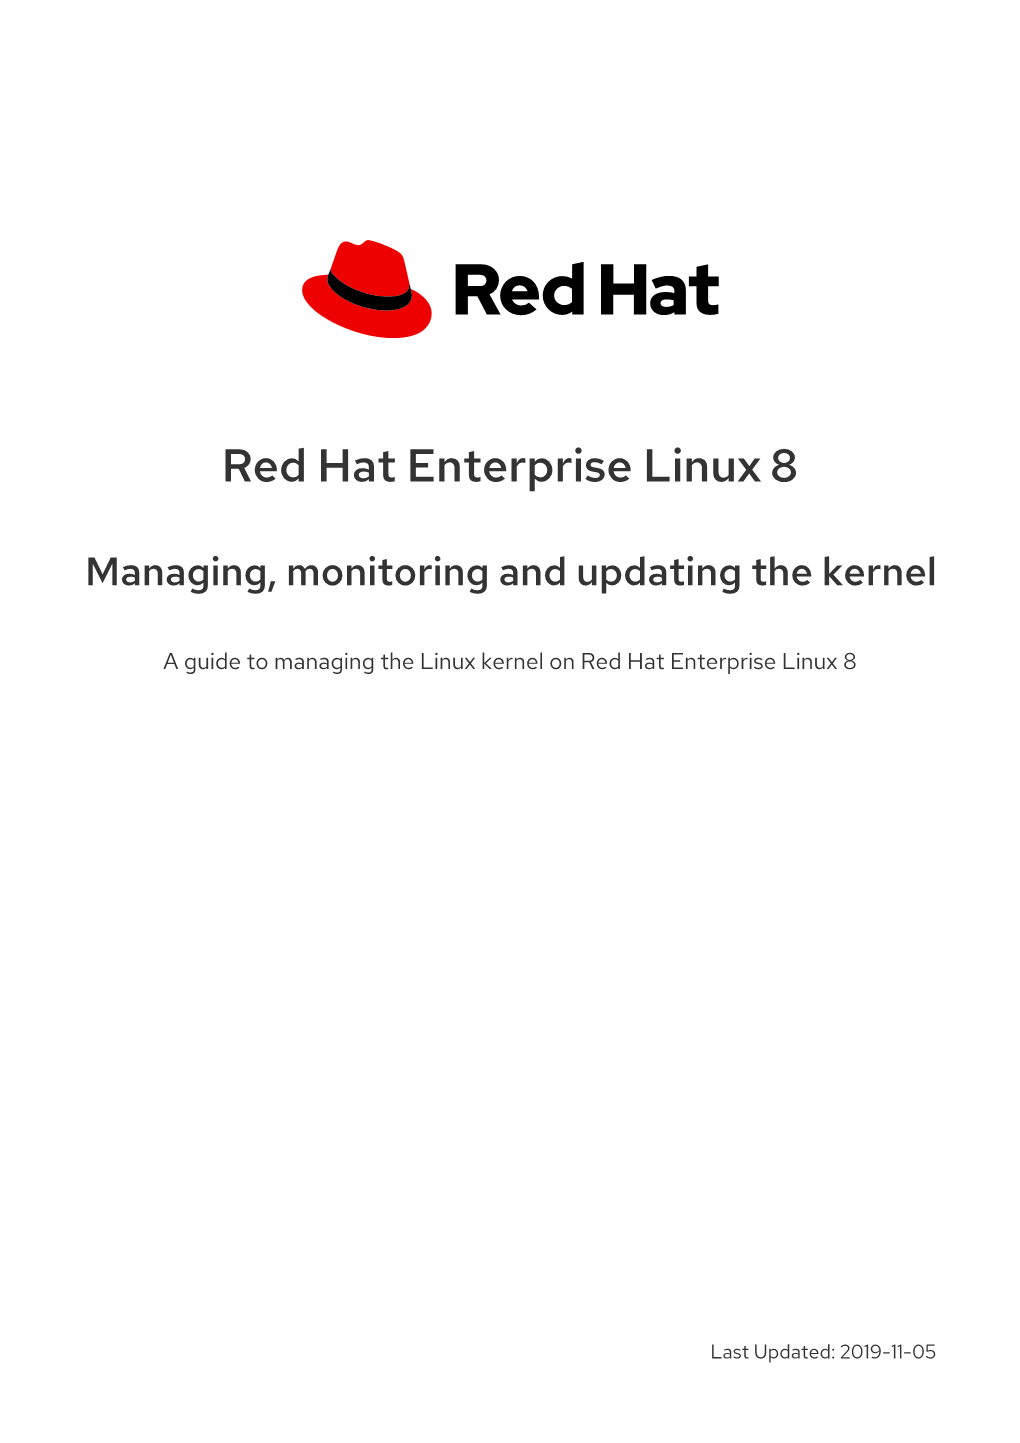 Red Hat Enterprise Linux 8 Managing, Monitoring and Updating the Kernel